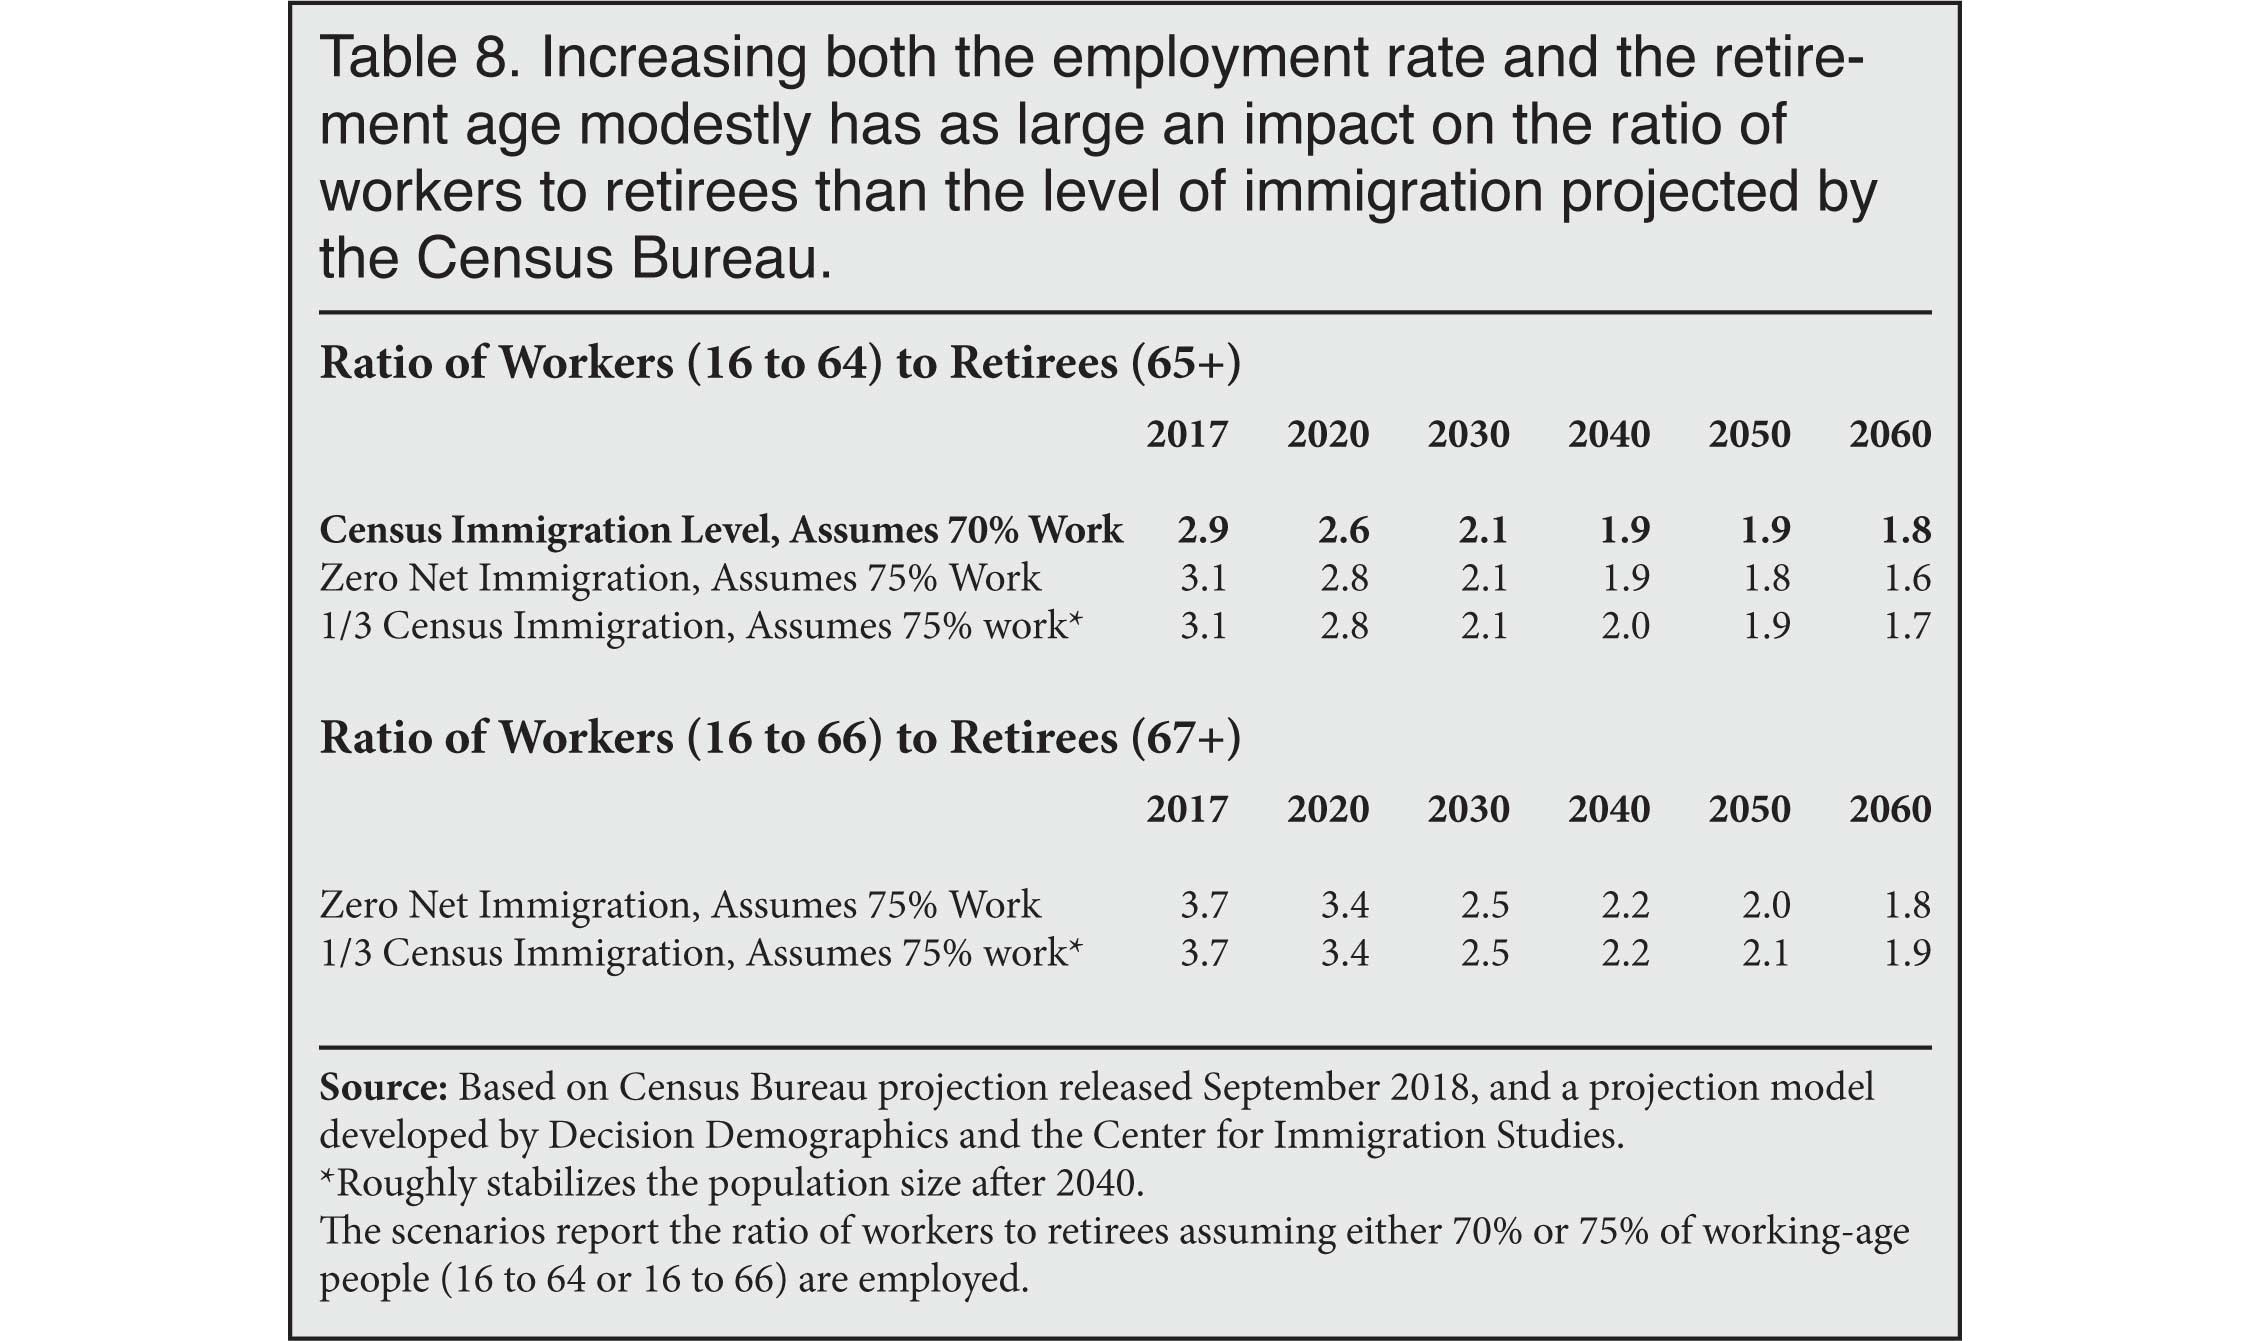 Table: Increasing both the Employment Rate and the Retirement Age Modestly has as Large an Impact on the Ratio of Workers to Retirees than the Level of Immigration Projected bu the Census Bureau